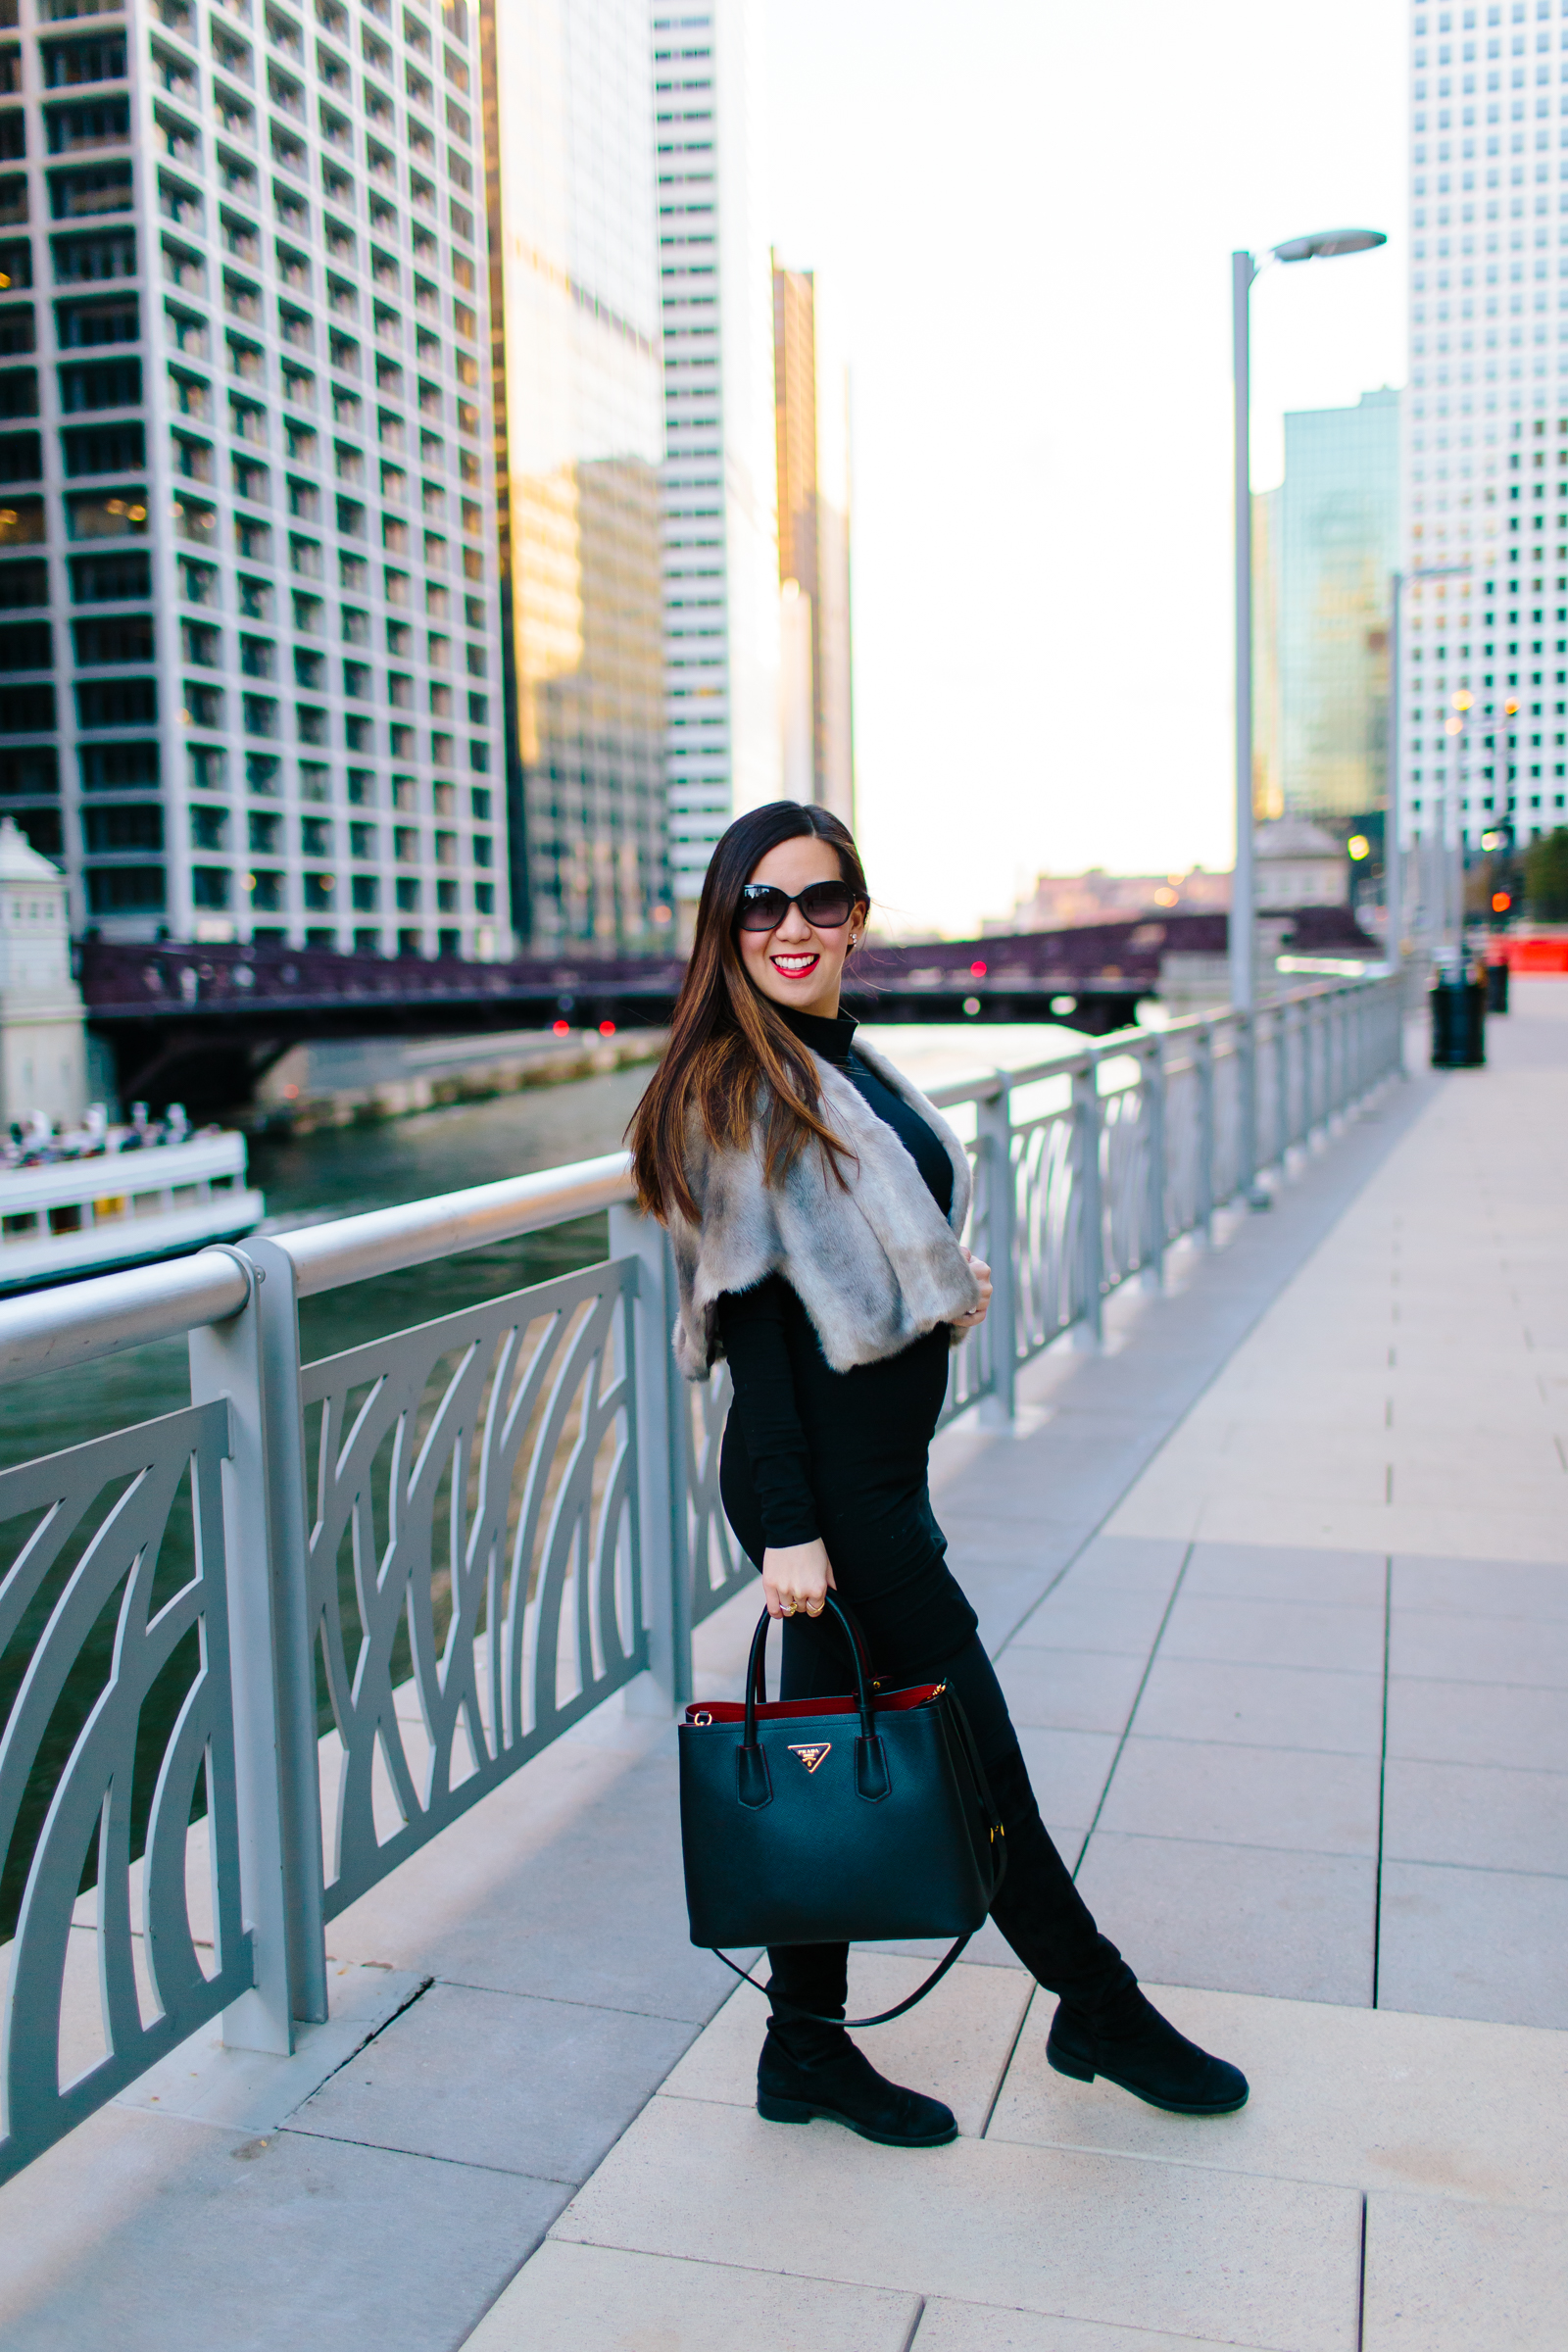 Making a Regular Outfit More Holiday Appropriate, Tia Perciballi Fashion & Lifestyle Blog